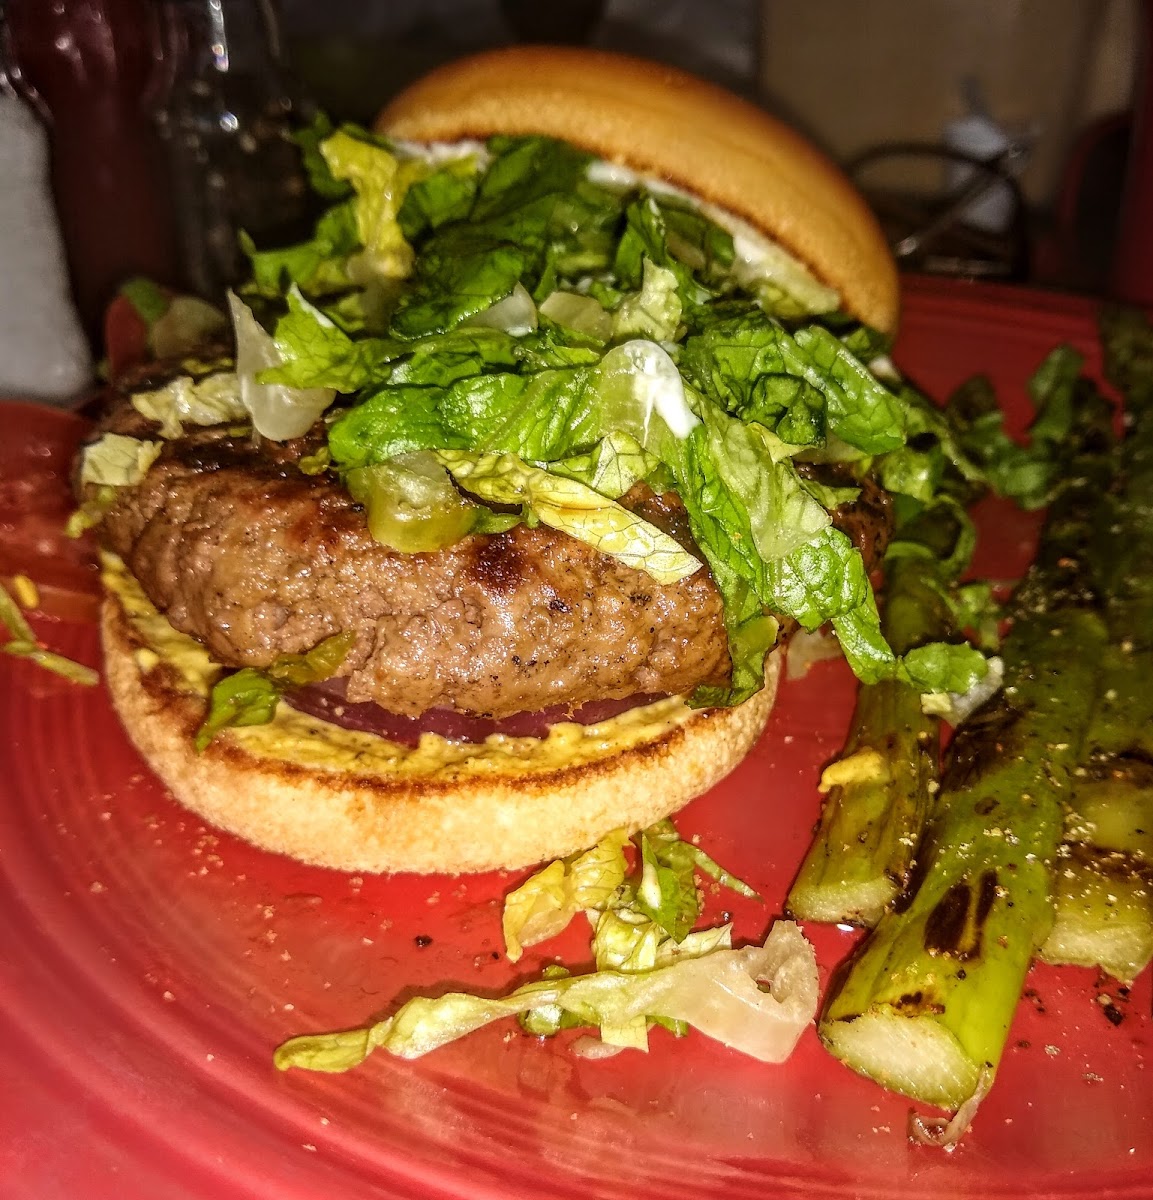 Gluten-Free Burgers at Barnaby's Cafe